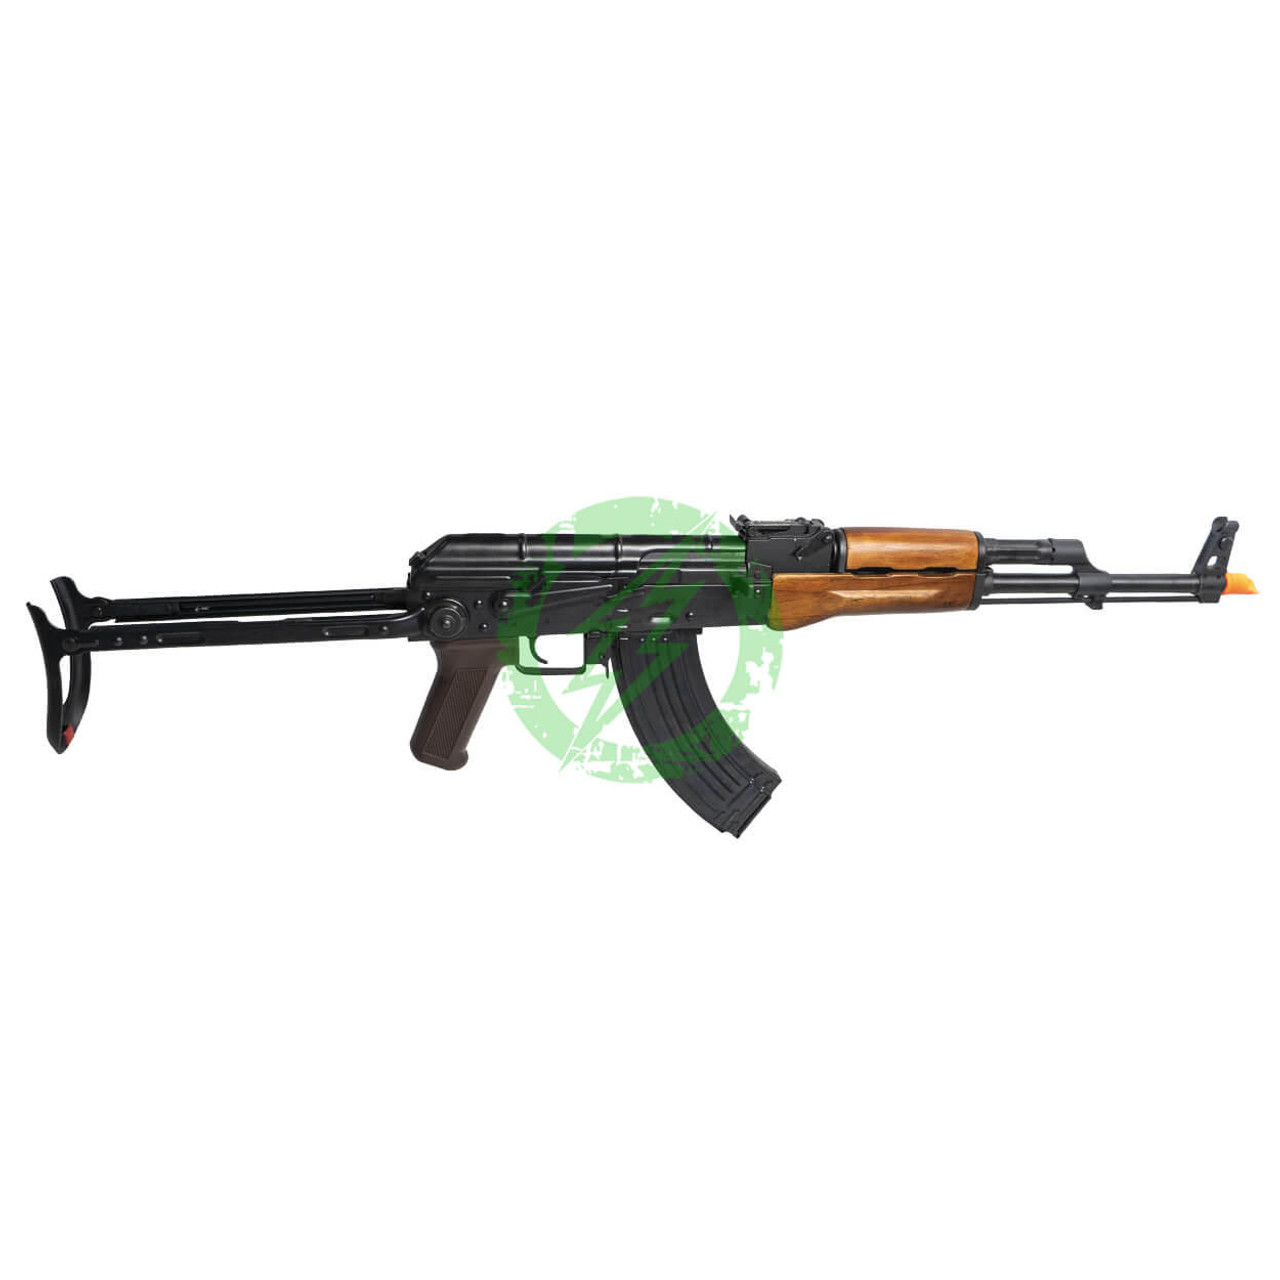  E&L Airsoft New Essential Version AKMS AEG Rifle Full Length / Steel Body with Wooden Furniture 